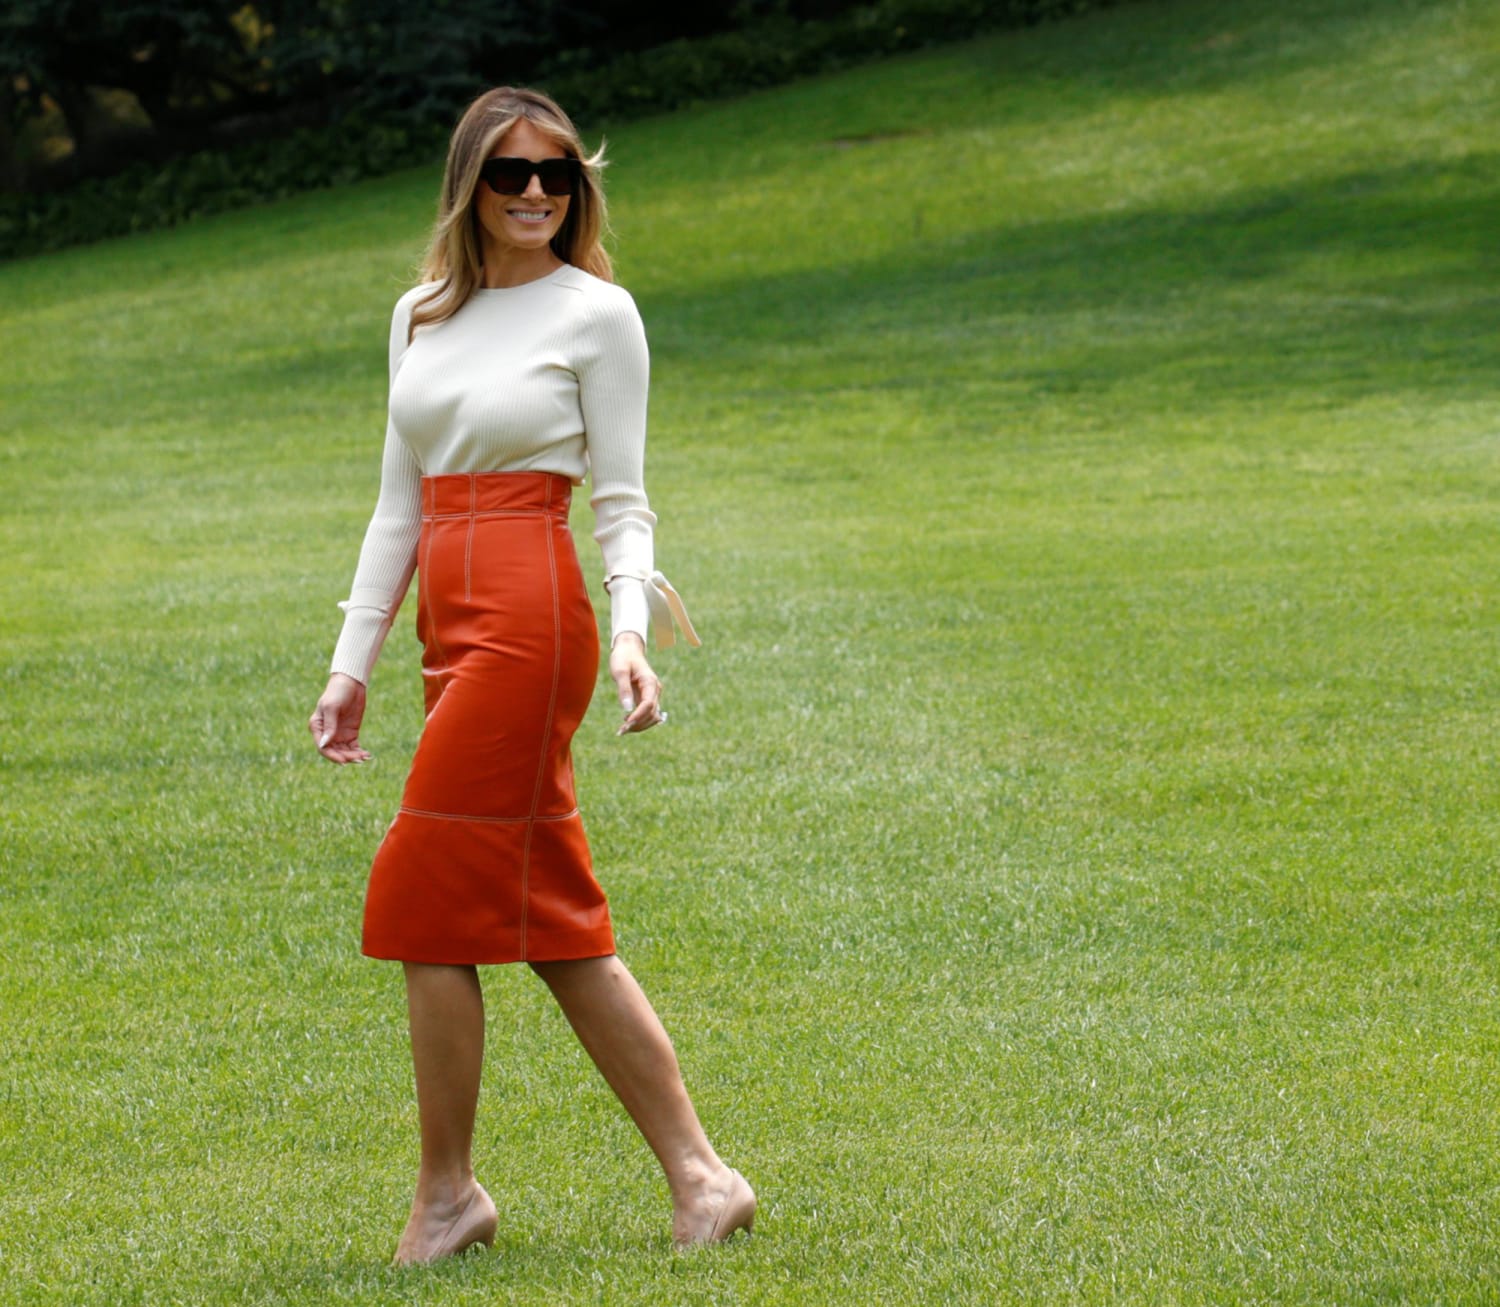 Model First Lady Melania Trump Conspicuously Absent From Magazine Covers